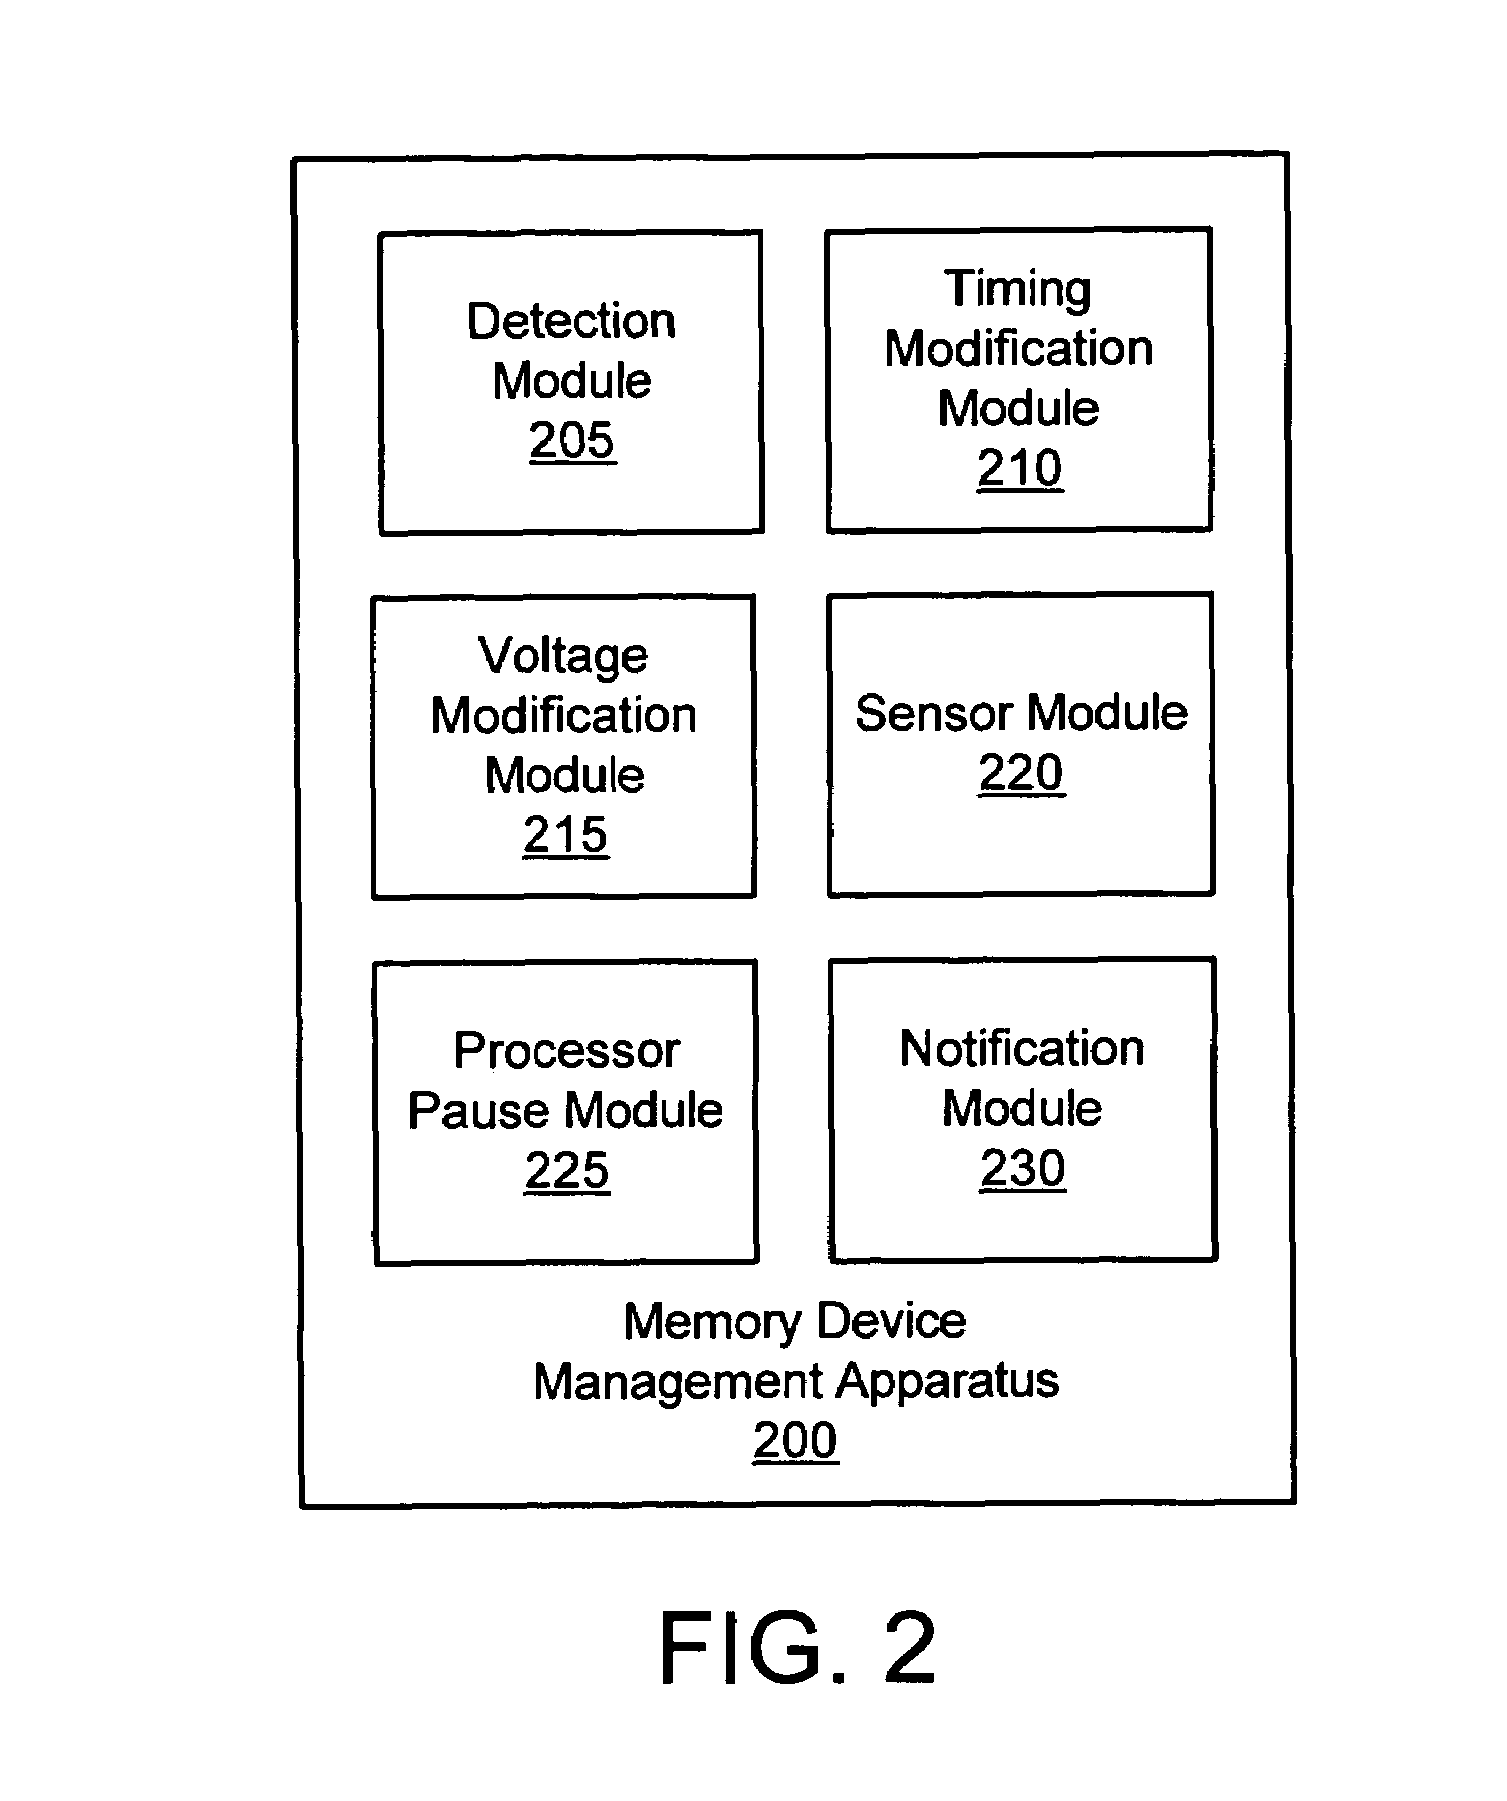 Apparatus, system, and method for modifying memory voltage and performance based on a measure of memory device stress